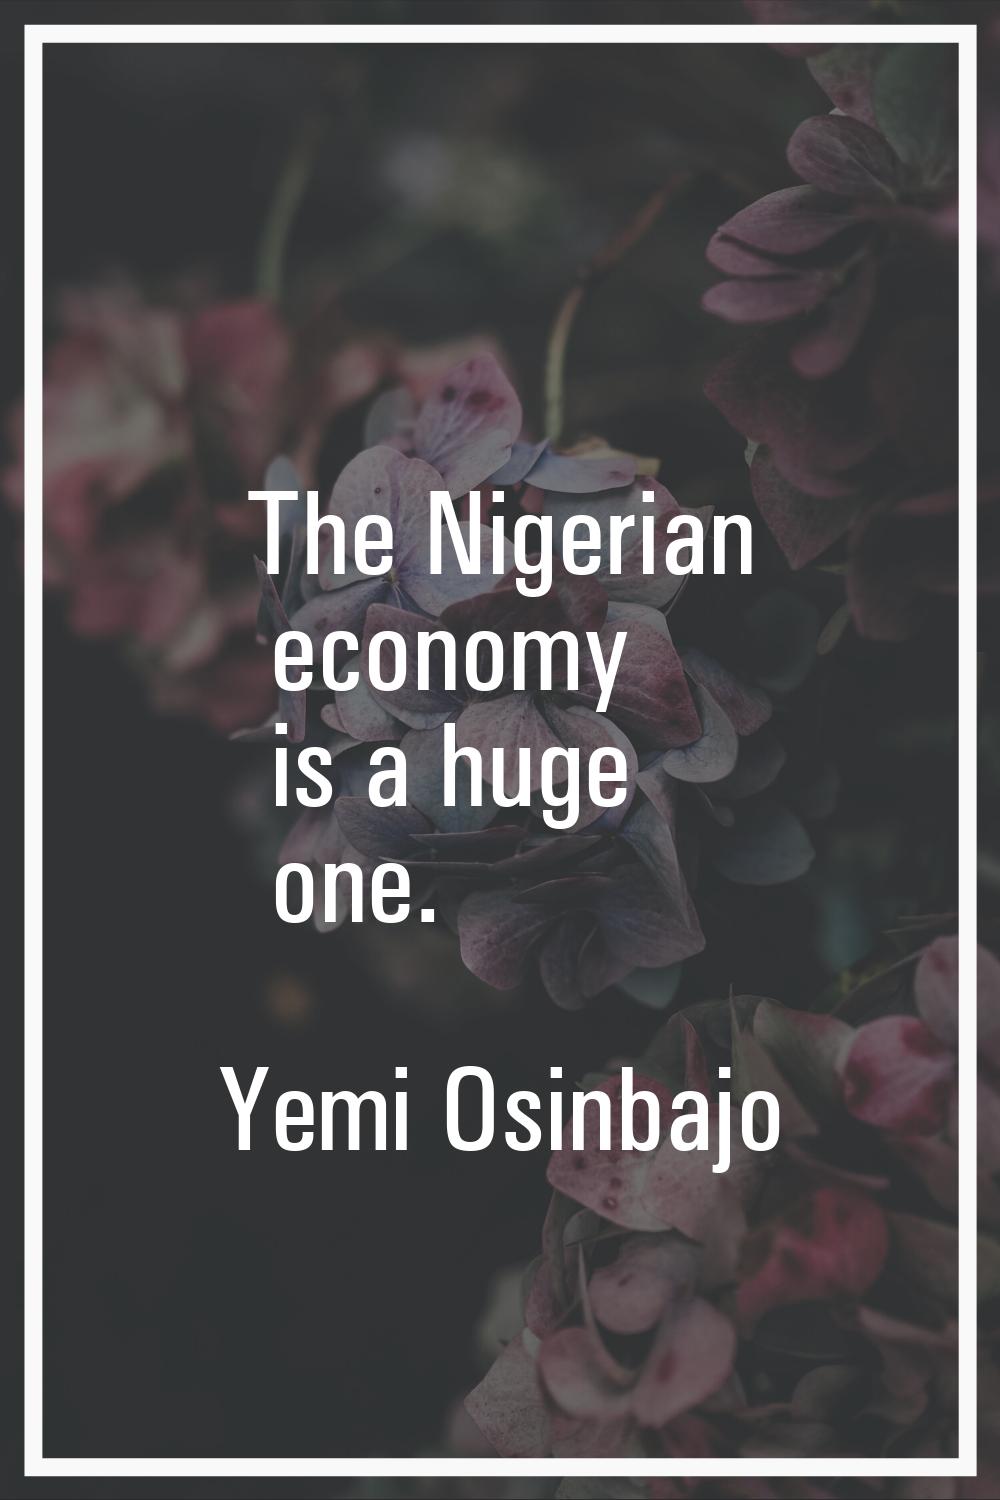 The Nigerian economy is a huge one.